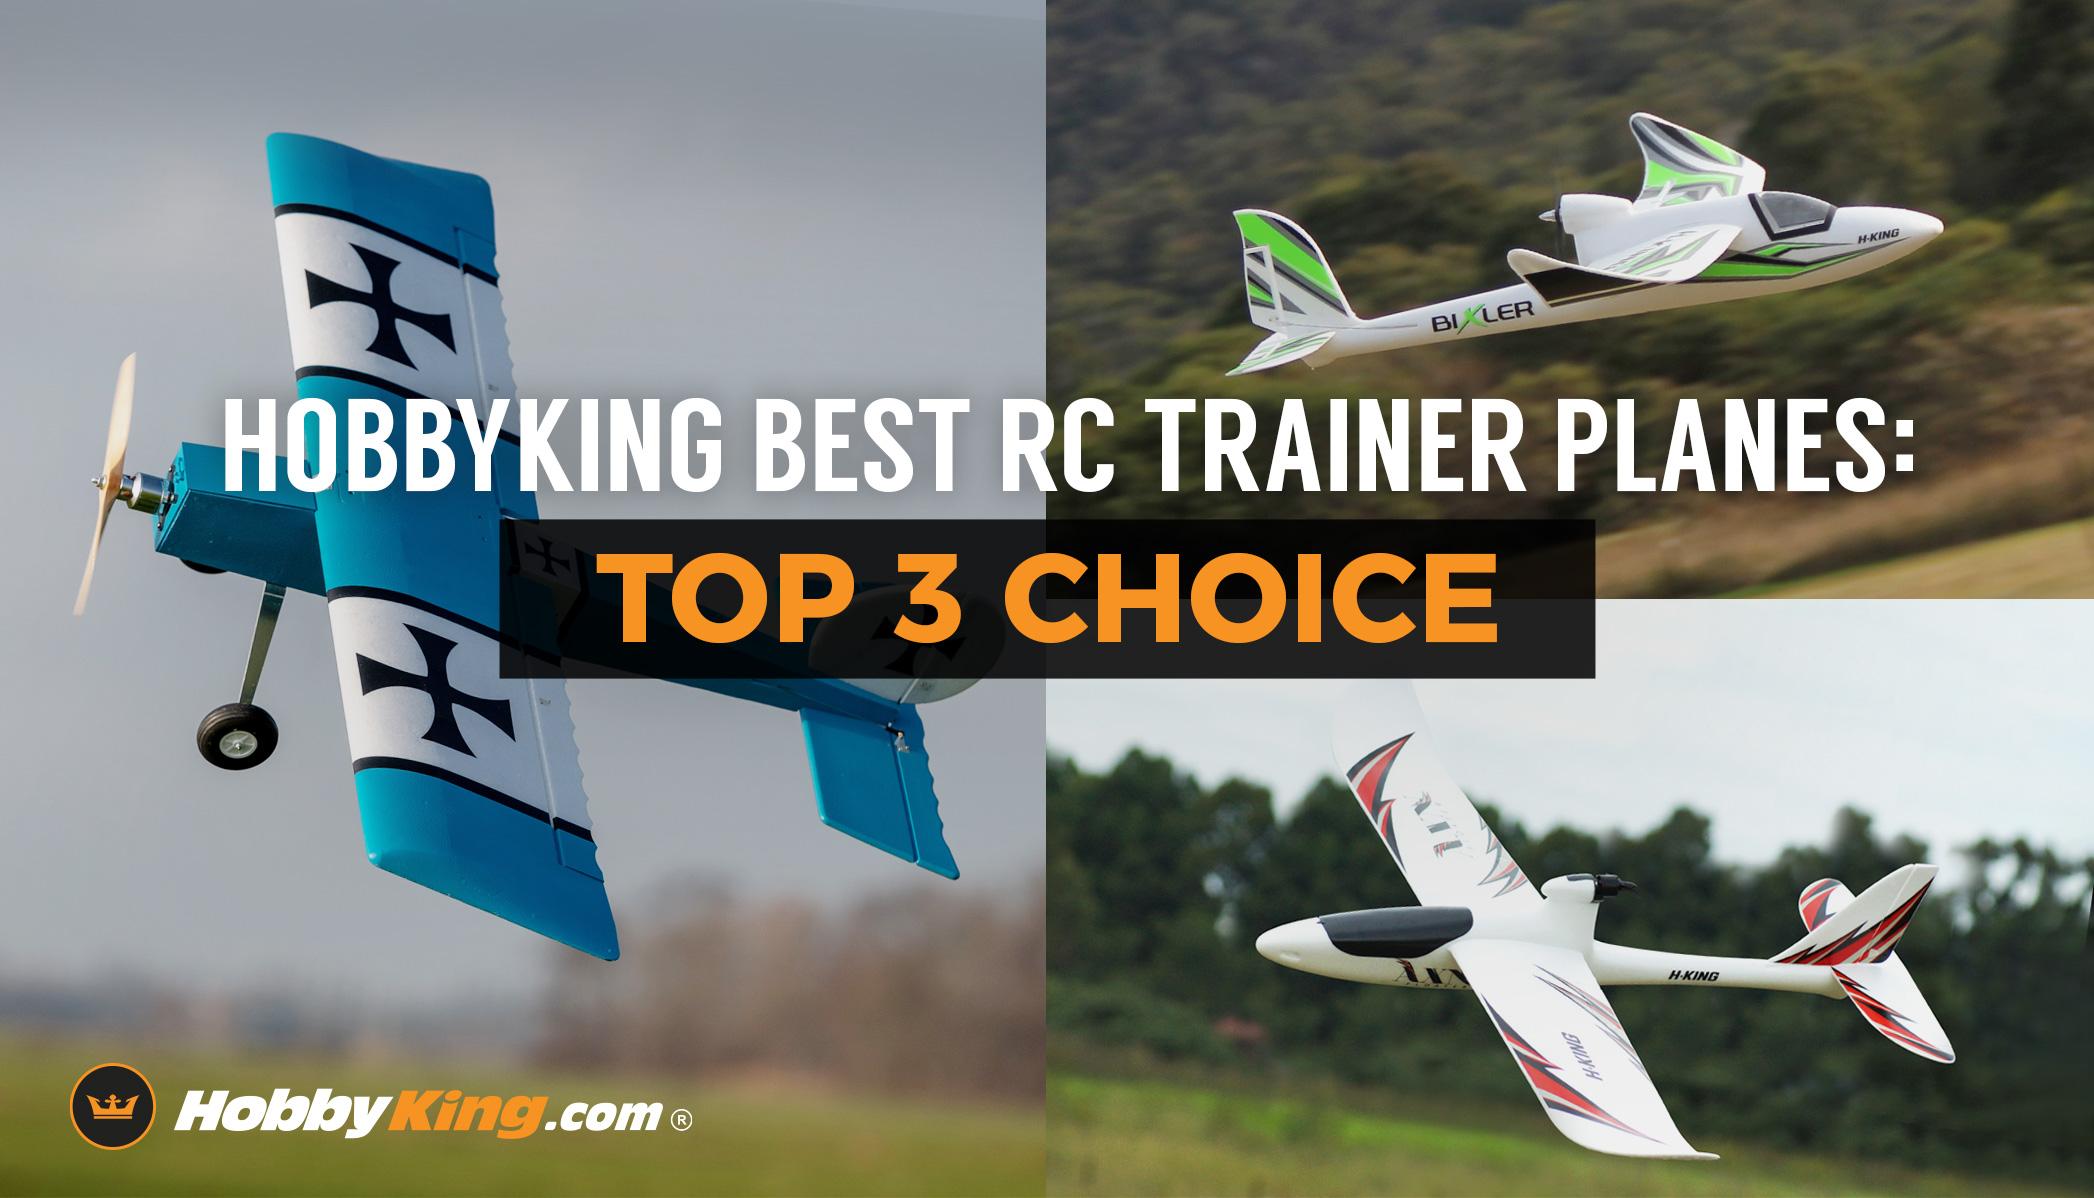 Hobbyking Rc Airplanes: Advantages of HobbyKing RC Airplanes